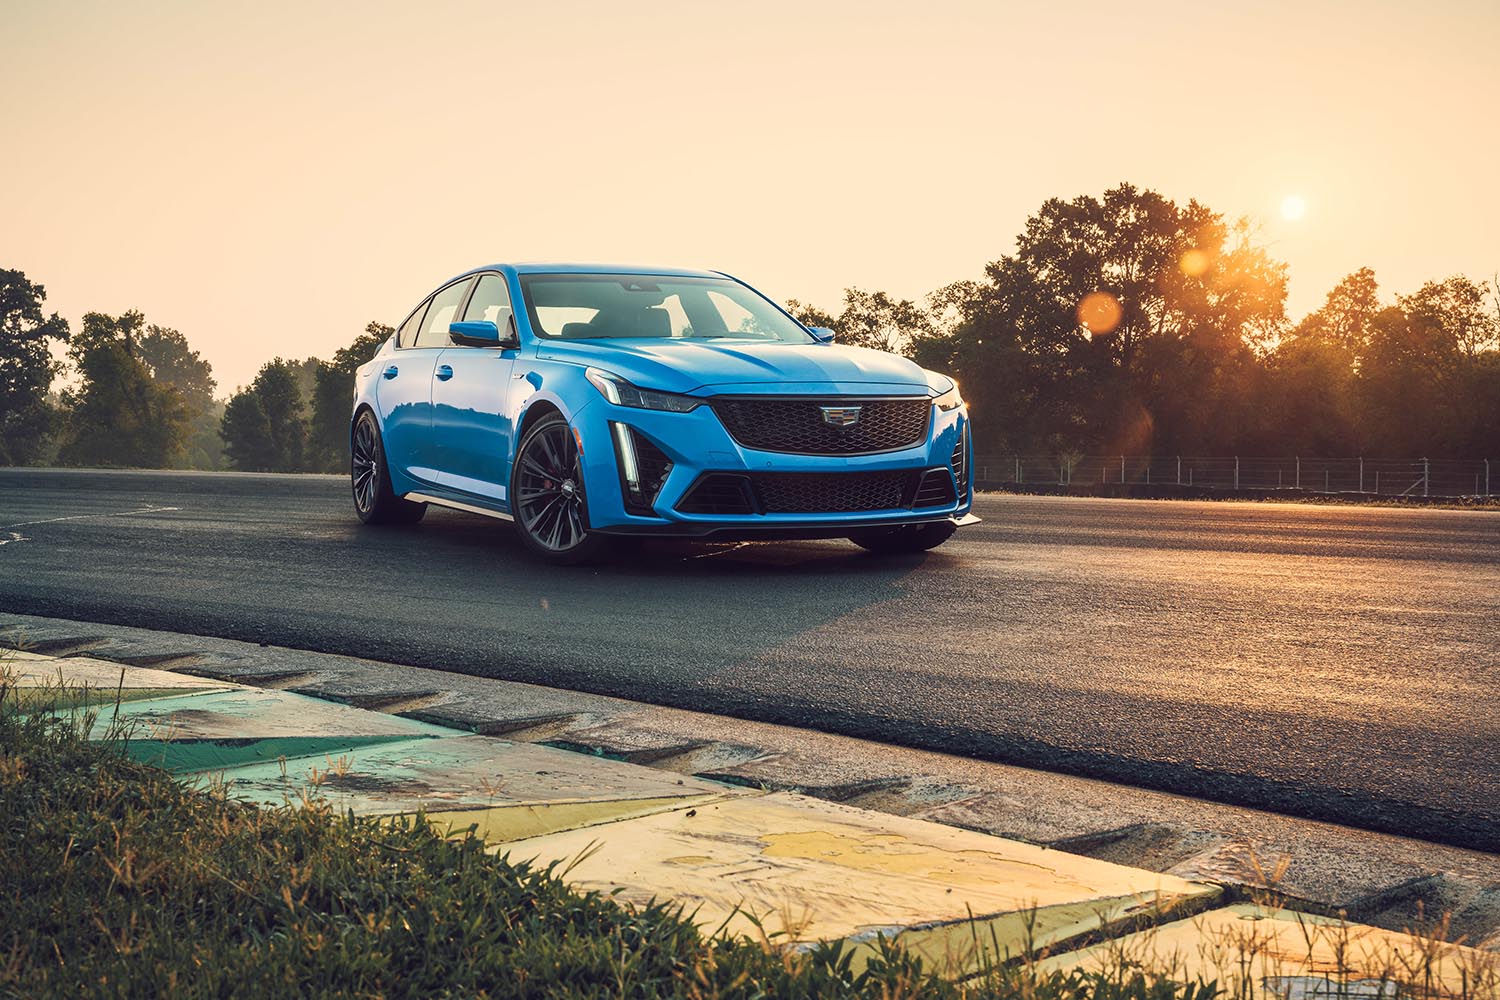 2023 Cadillac CT5-V Blackwing in Electric Blue parked on a raceway curve during early golden hour